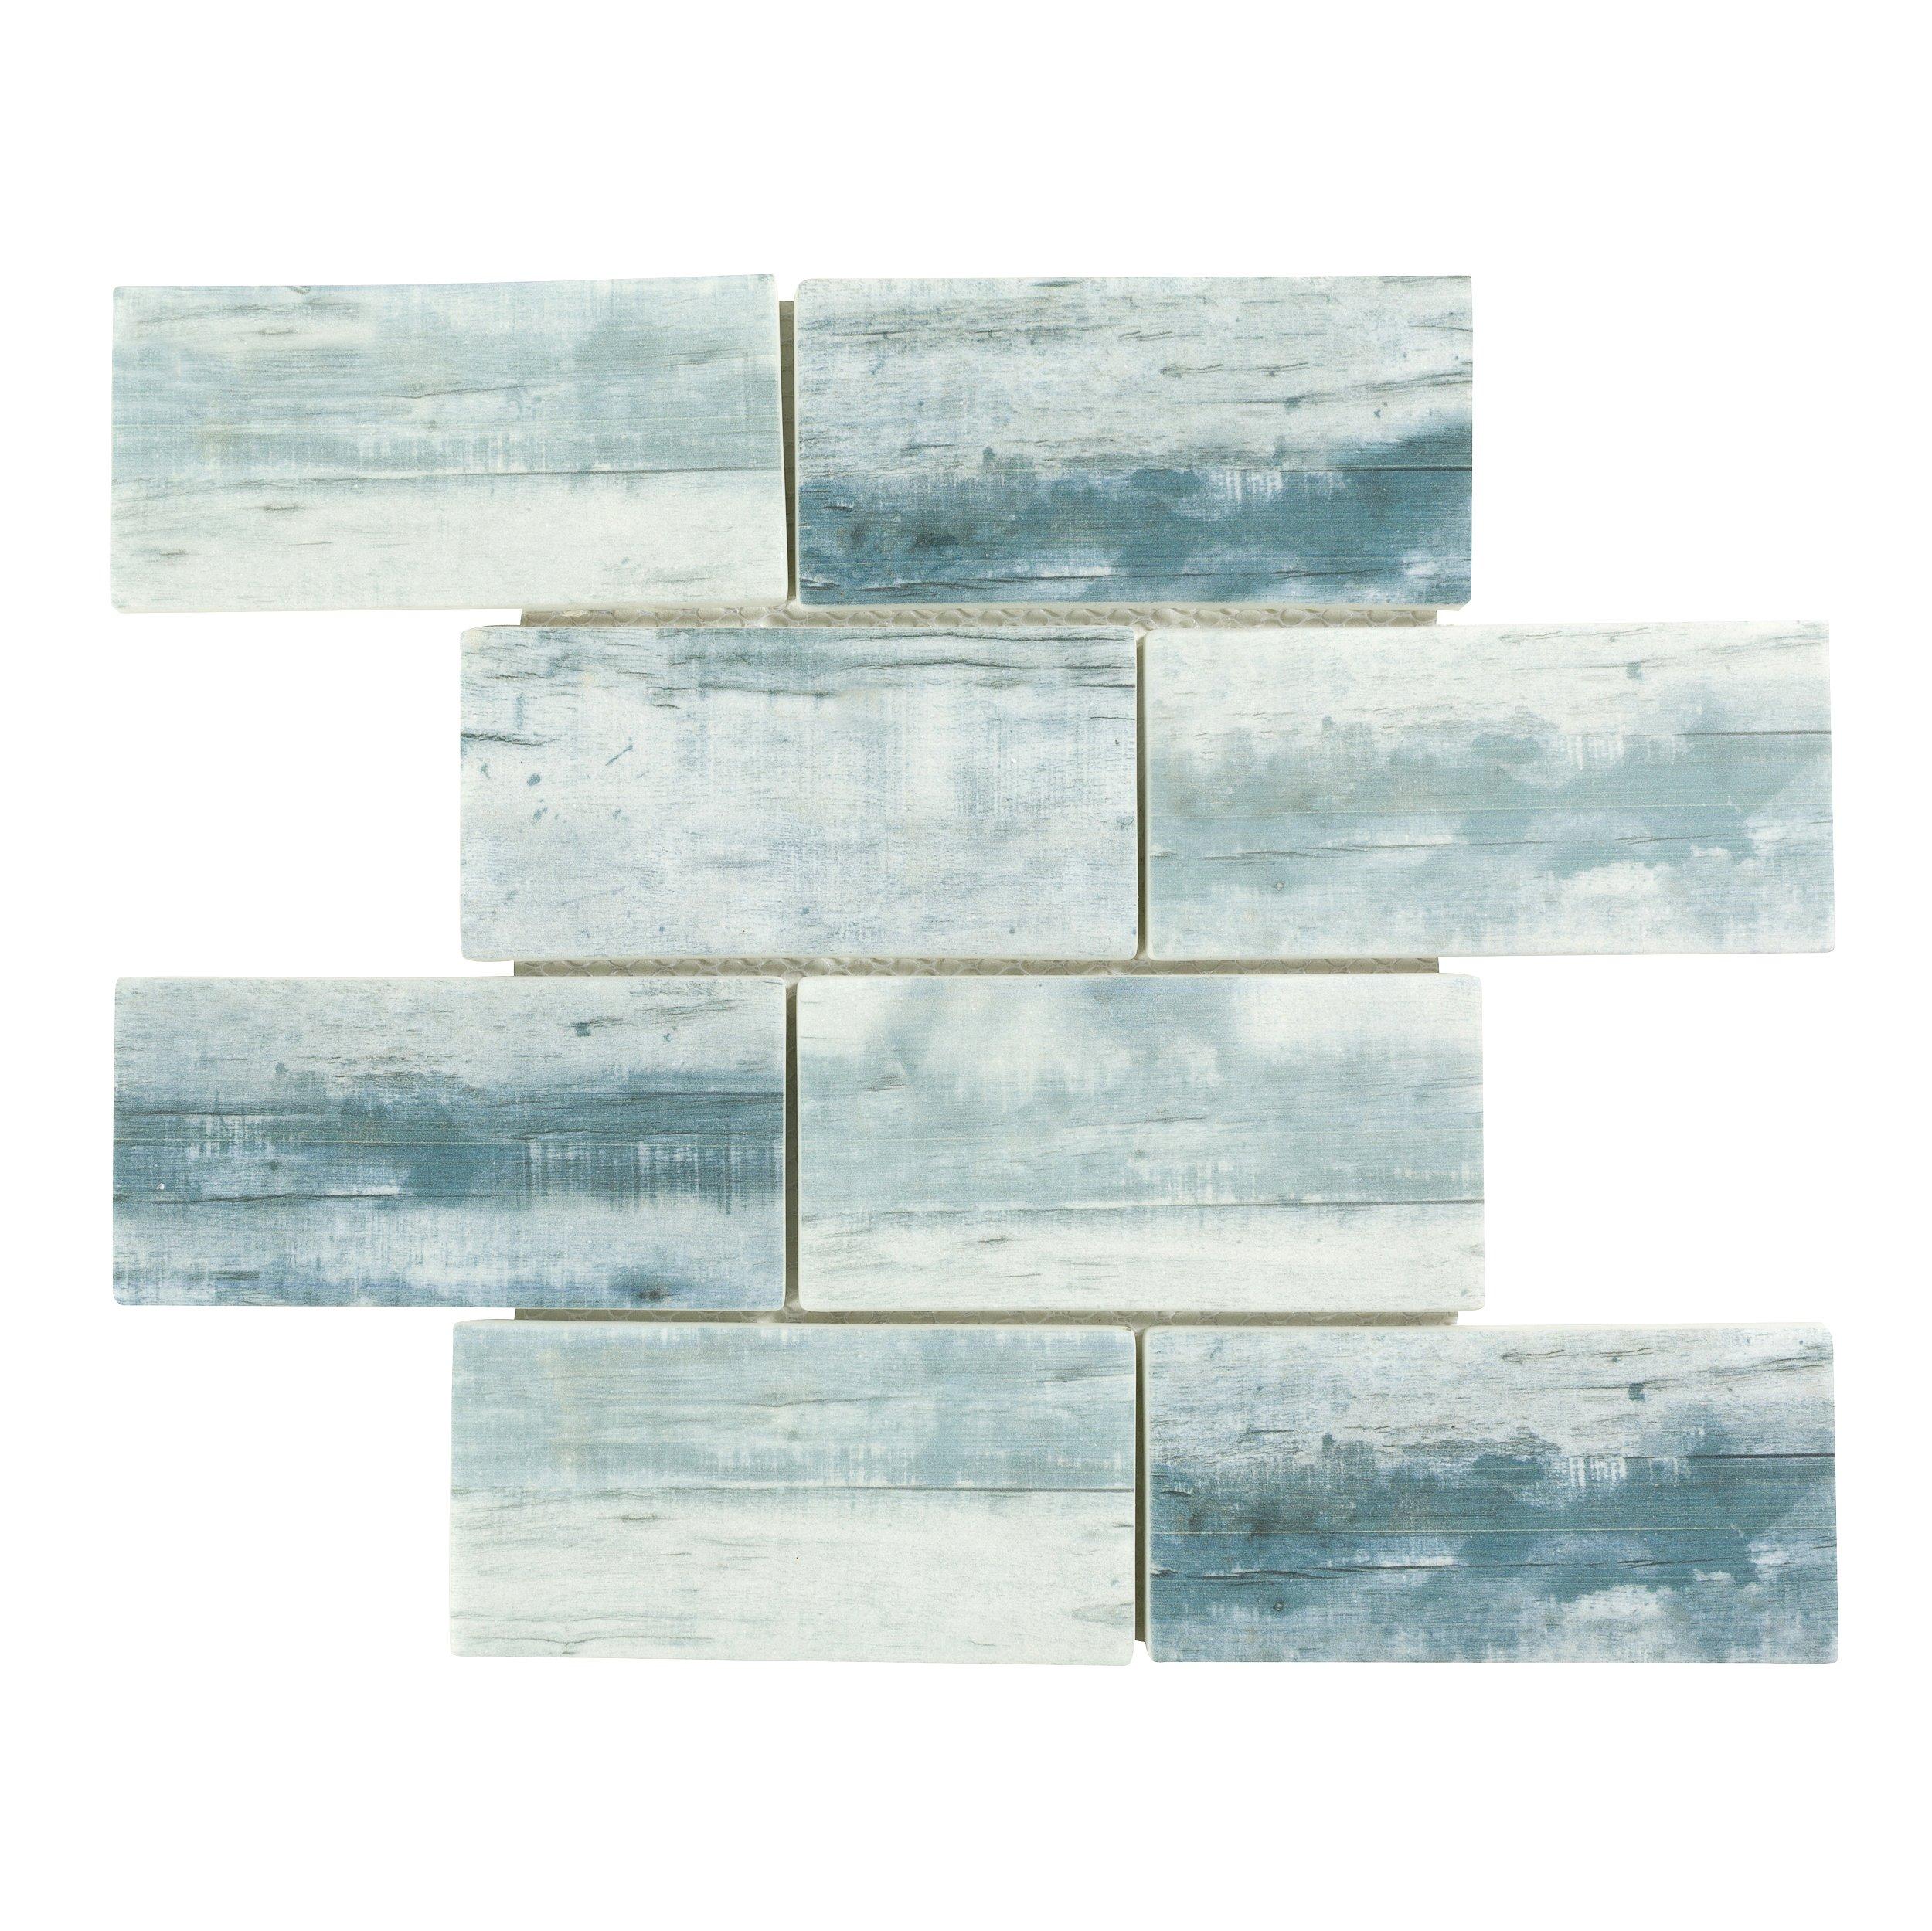 Blue Forest Marble Tile - 4 x 12 - 100464866 | Floor and Decor